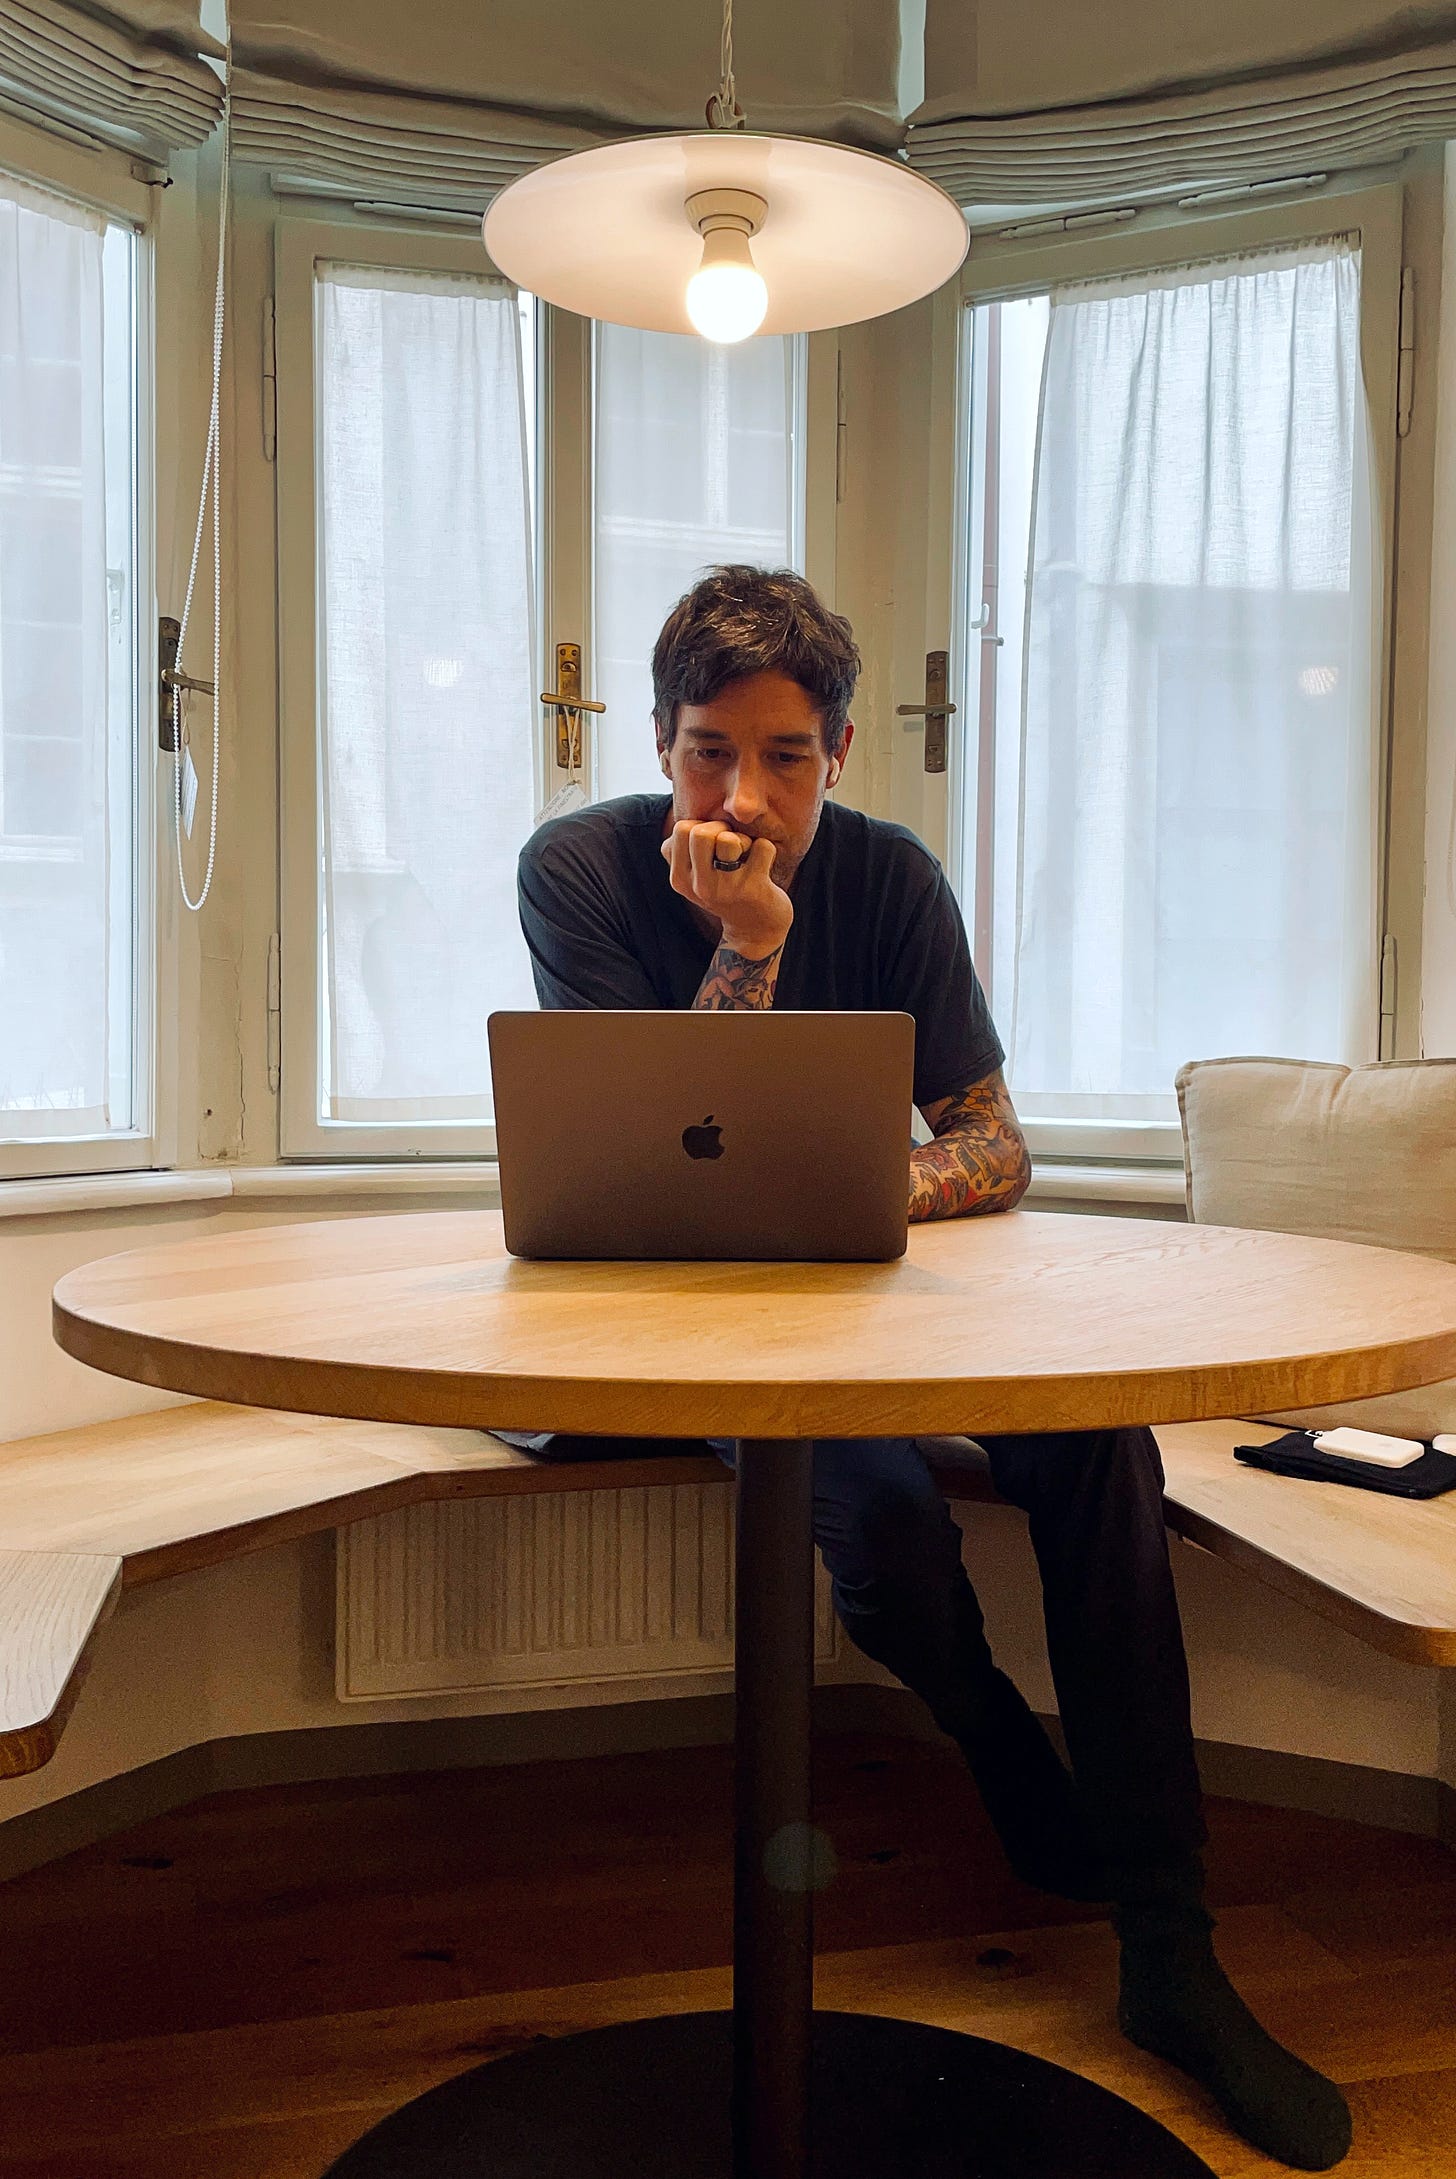 Author writing a book, sitting on a round table with his macbook